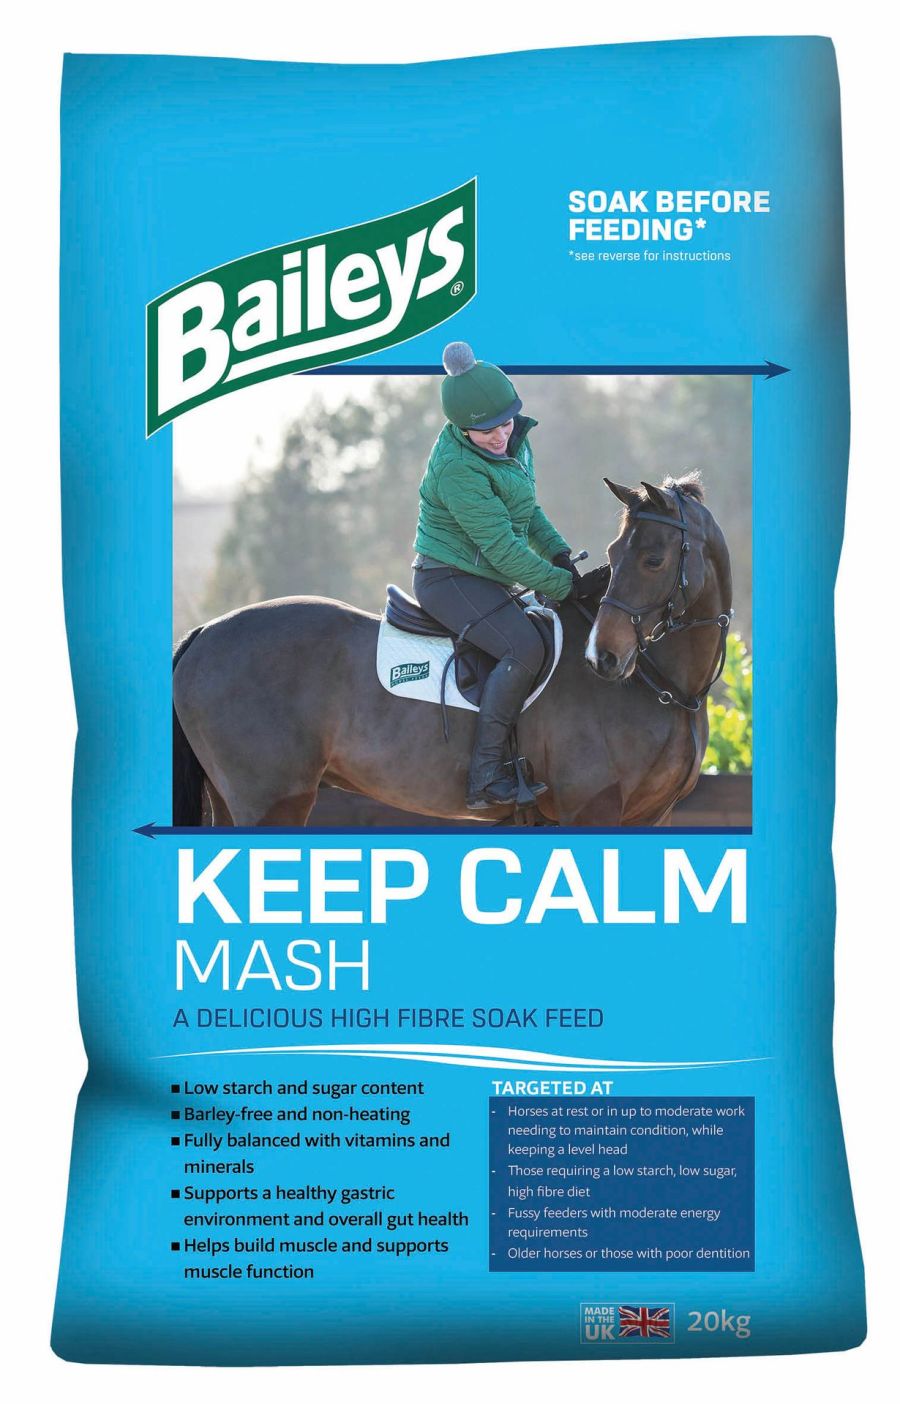 Pictured is a bag of Keep Calm Mash from the Baileys Horse Feed range